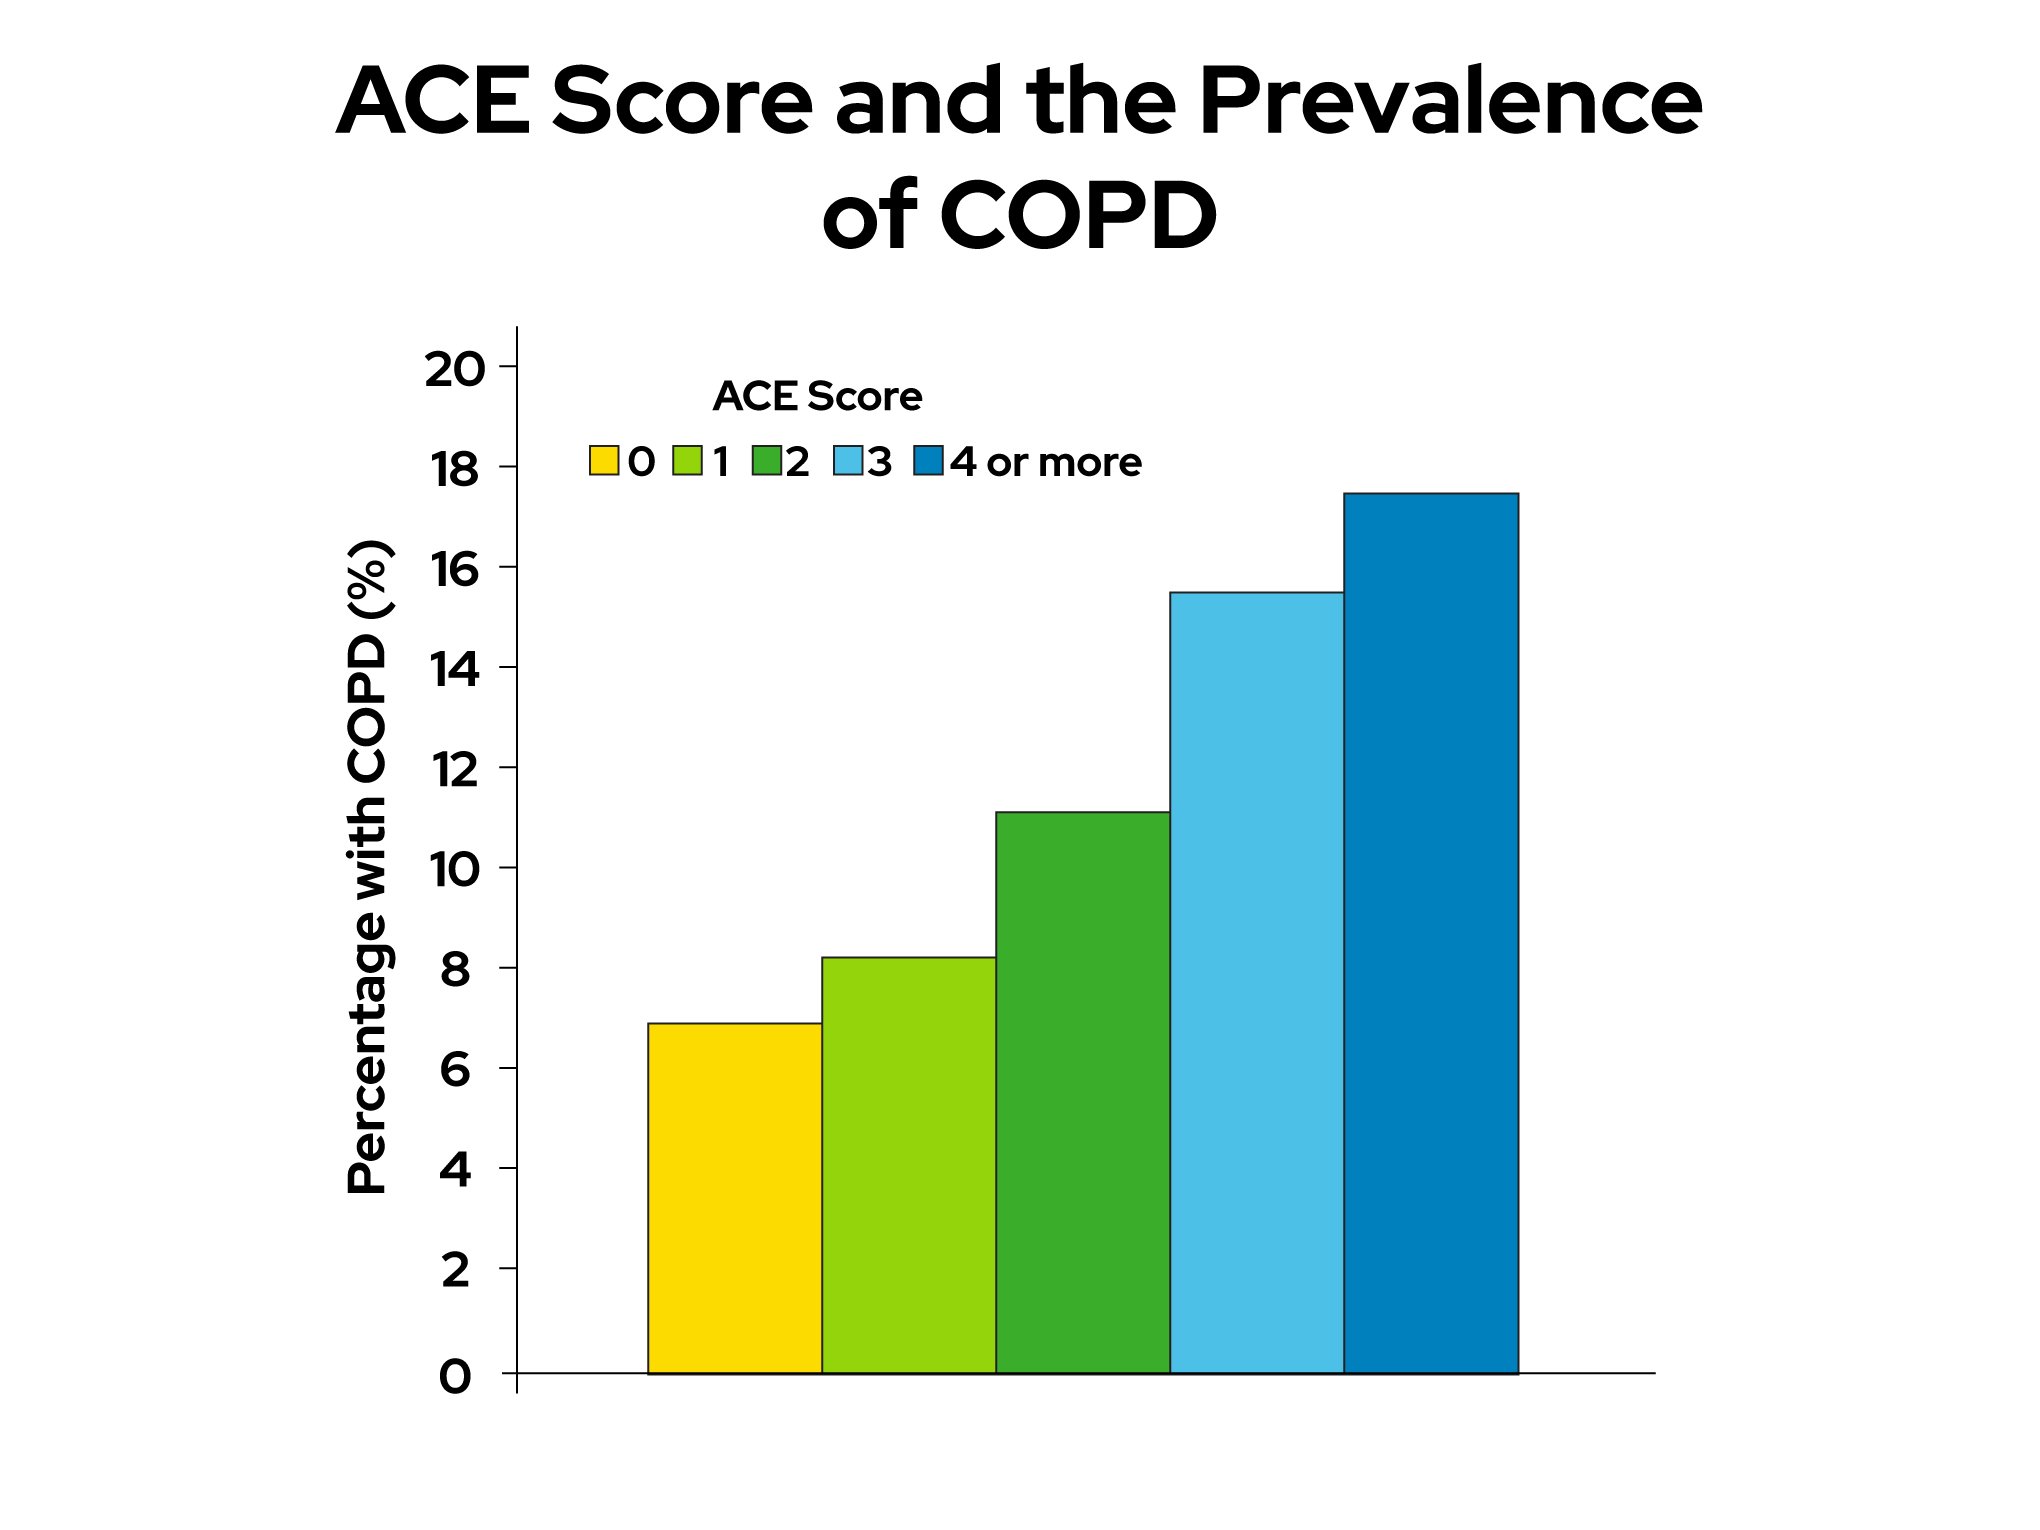 This graph comes from “The relationship of adverse childhood experiences to adult health, well being, social function and health care”, a book chapter by Drs. Vincent Felitti and Robert Anda, co-founders of the ACE Study, in “The Hidden Epidemic: The Impact of Early Life Trauma on Health and Disease.”